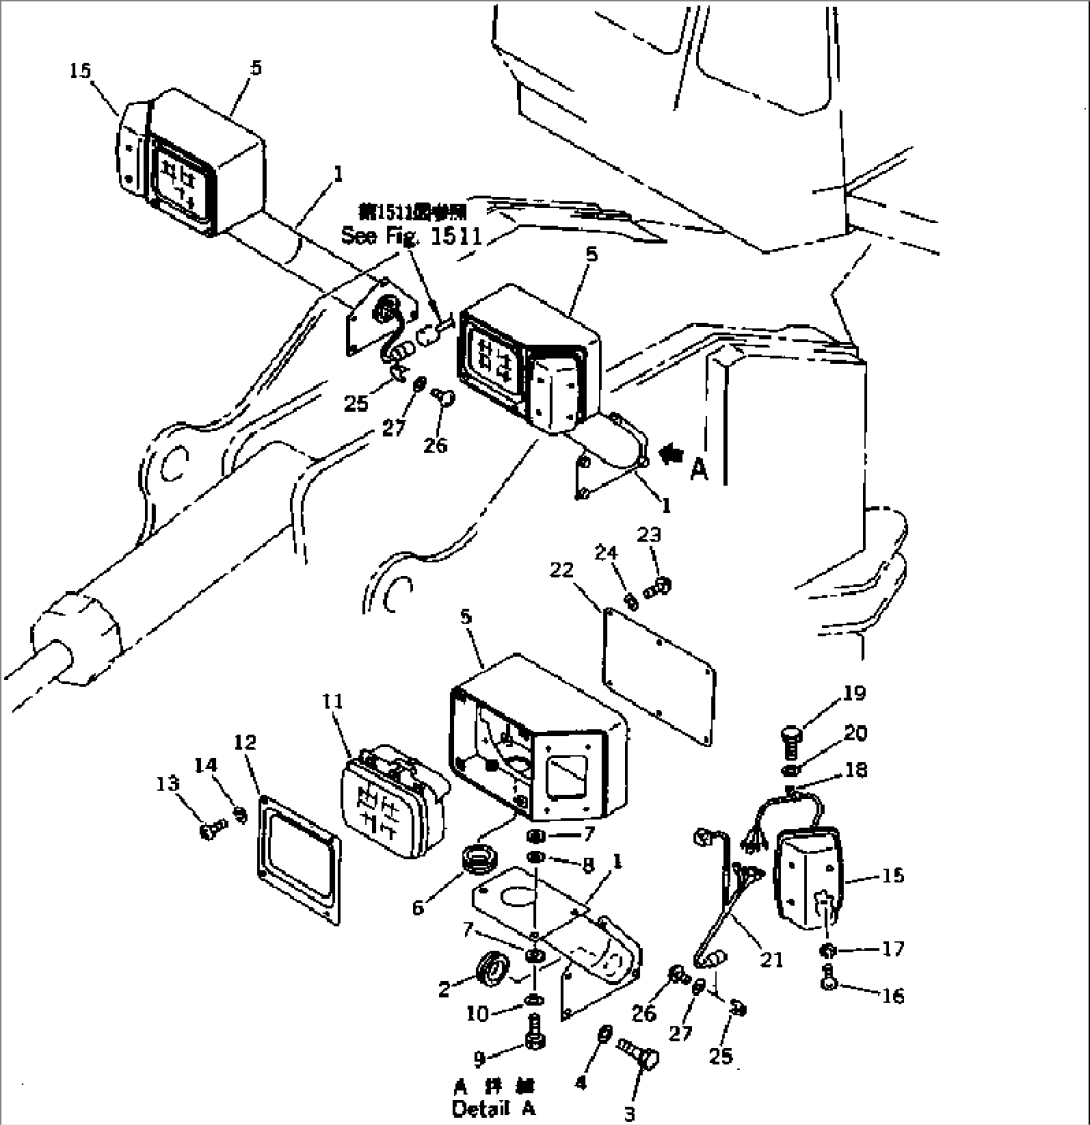 ELECTRICAL SYSTEM (FRONT LAMP)